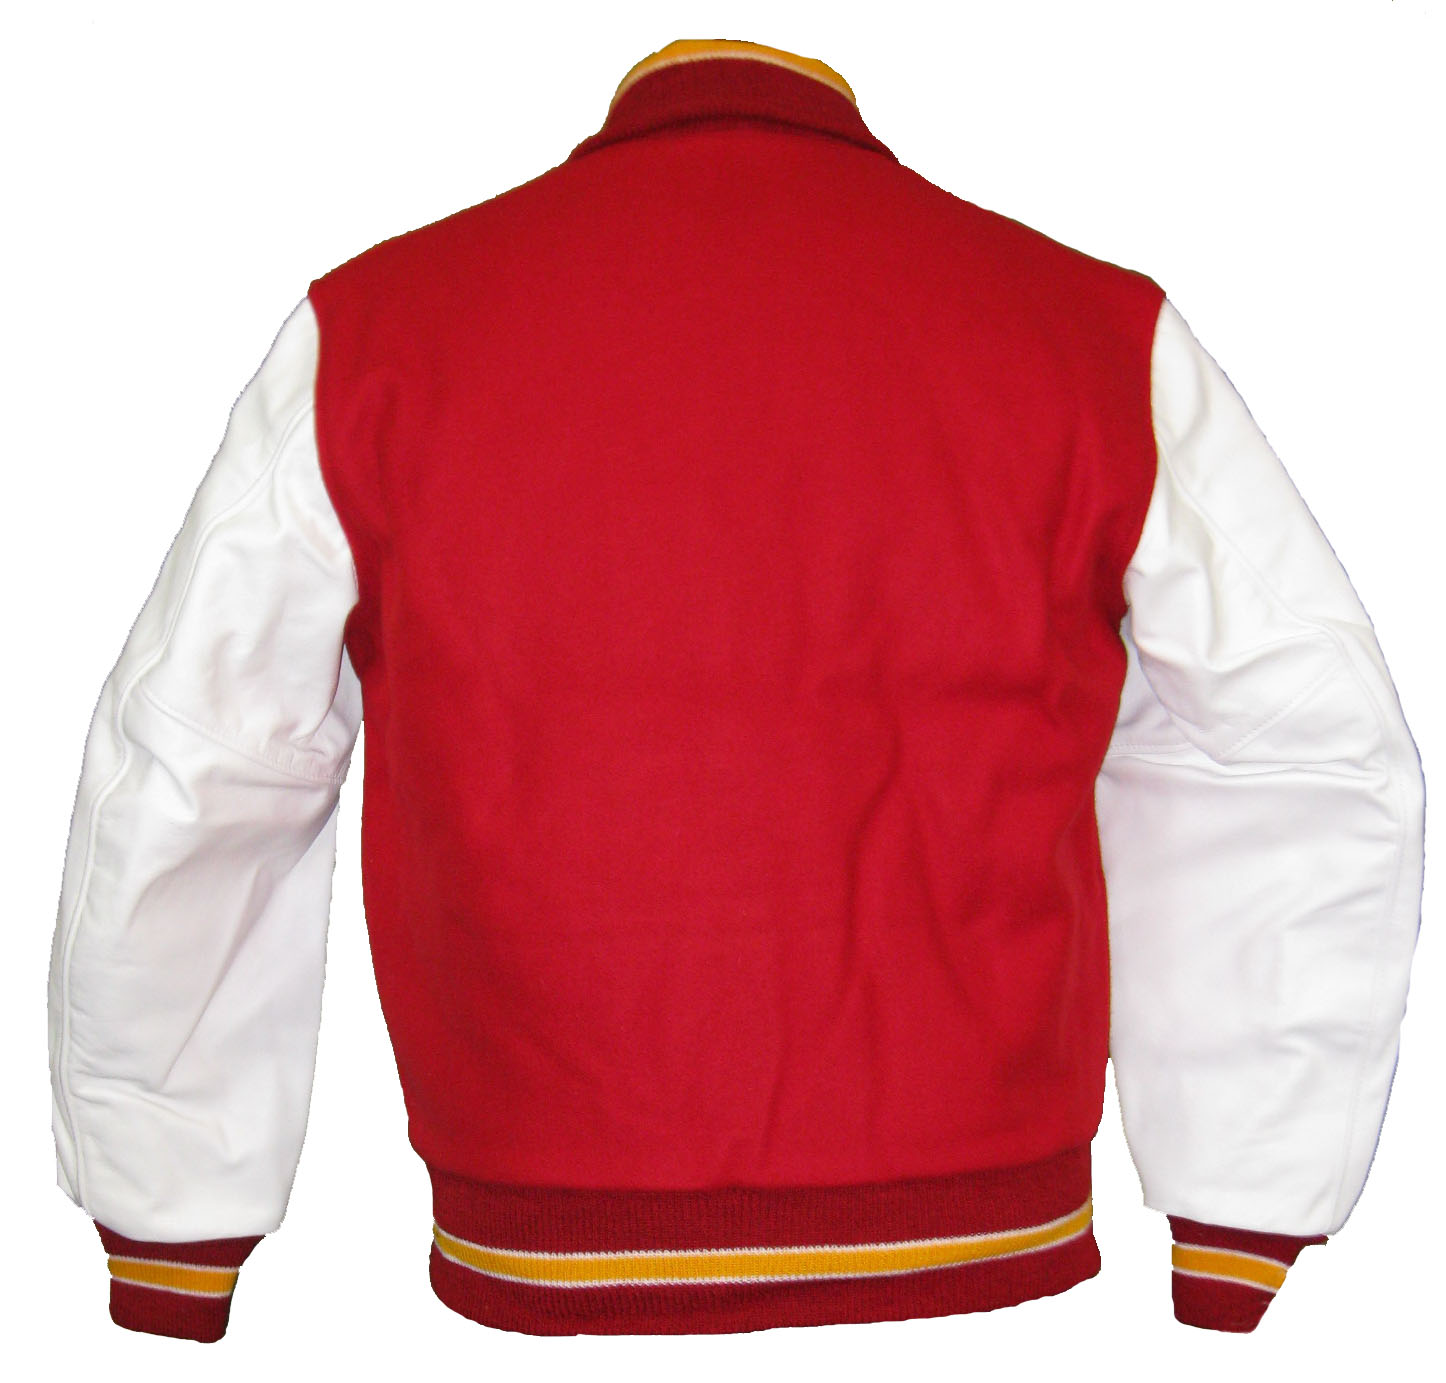 Download this Varsity Jacket Also... picture